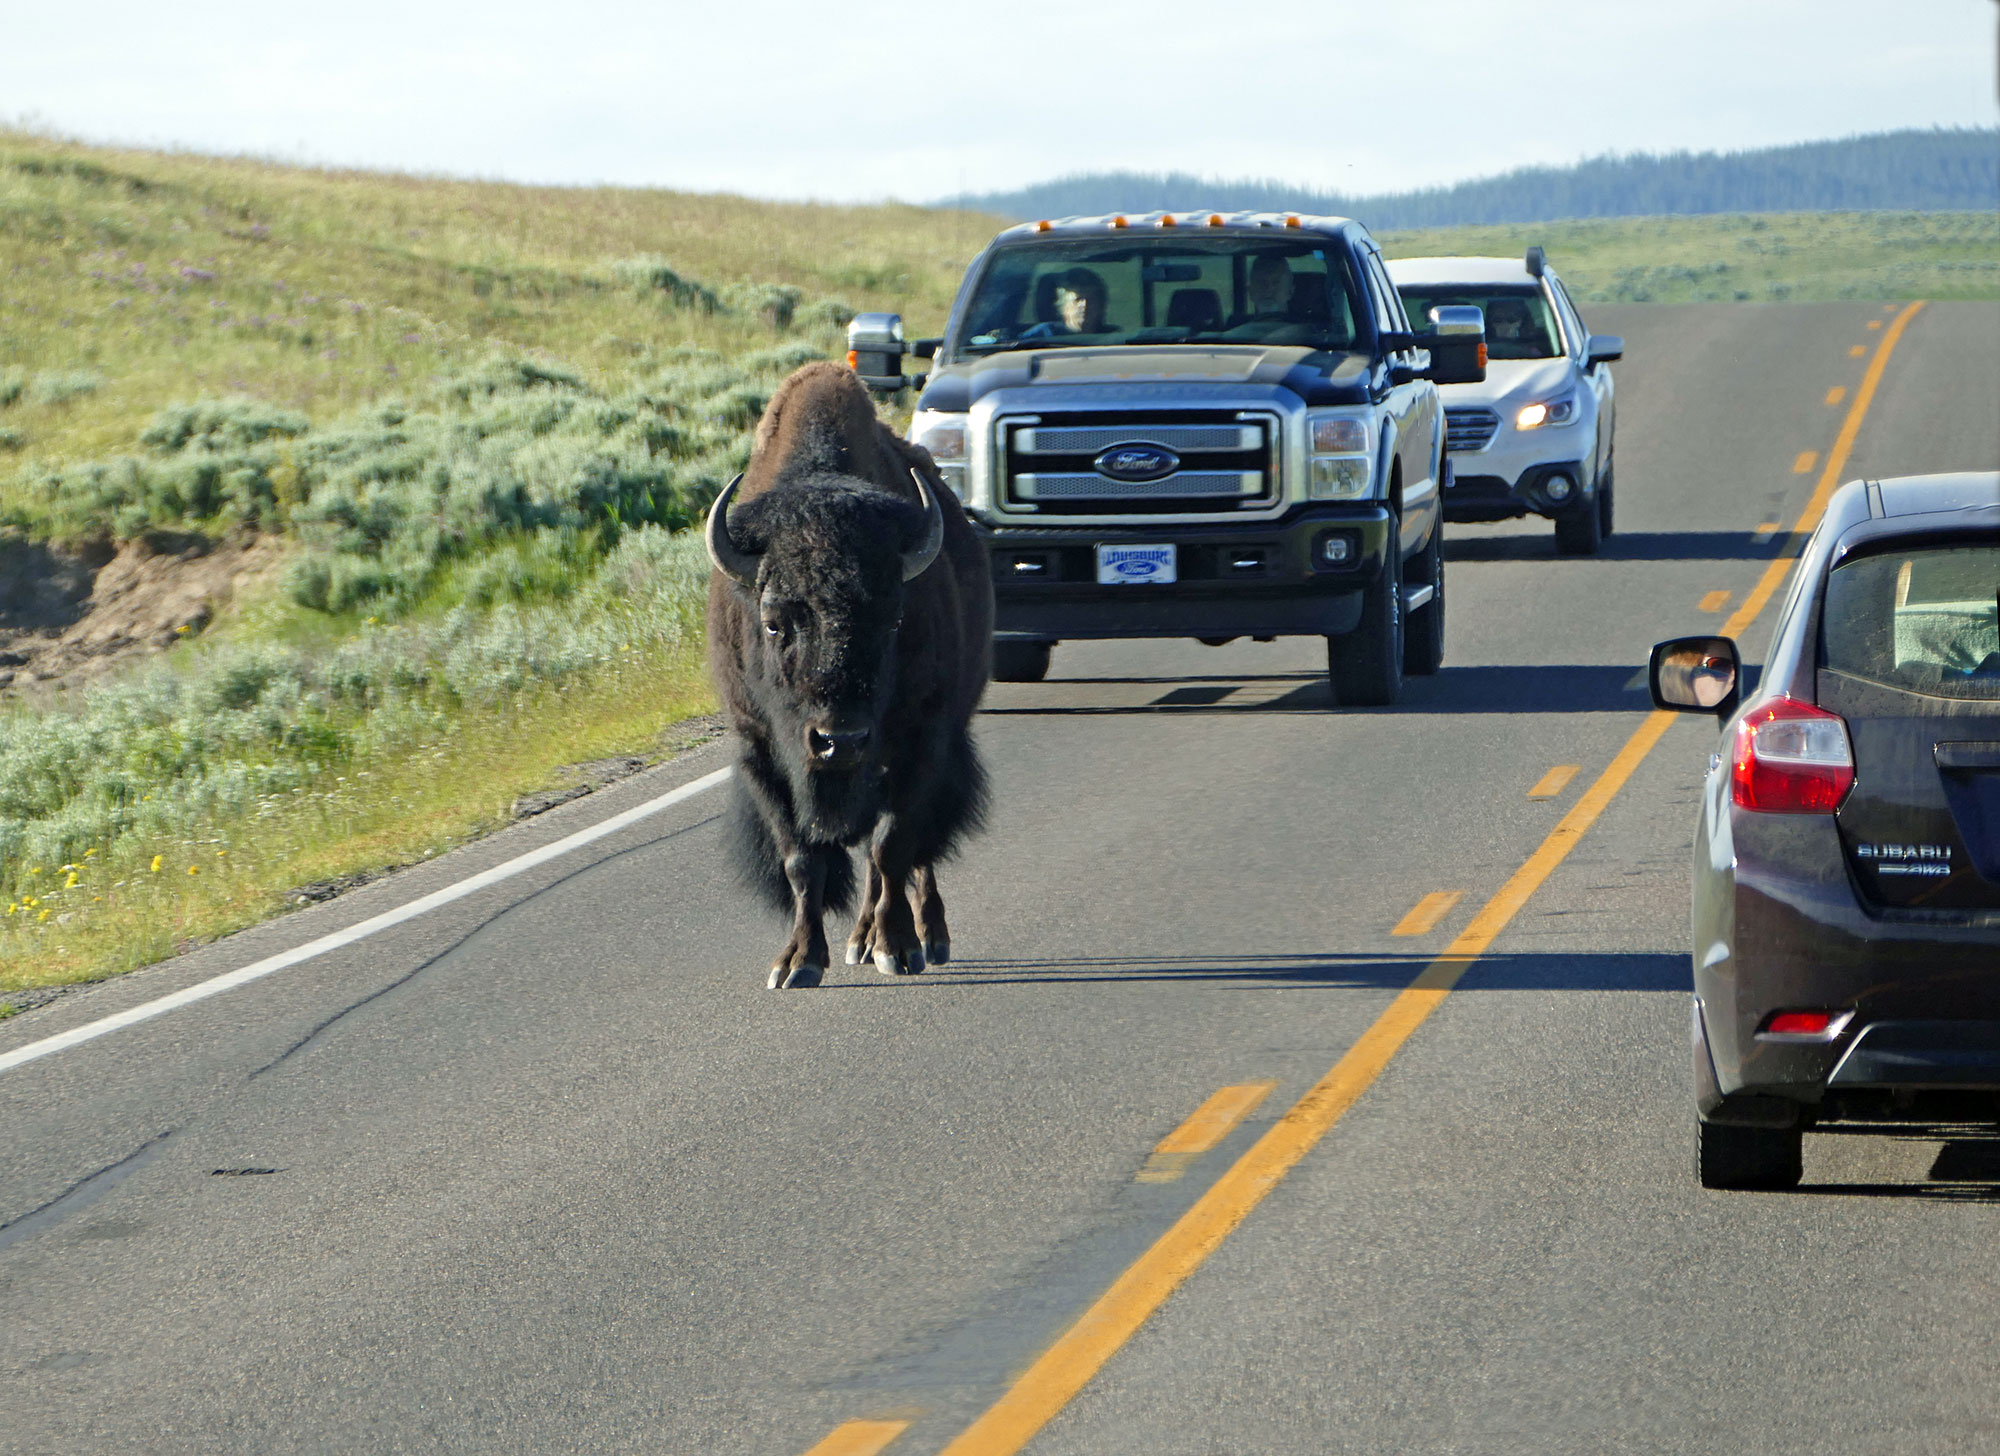 Yellowstone National Park male buffalo walking down middle of the highway with traffic